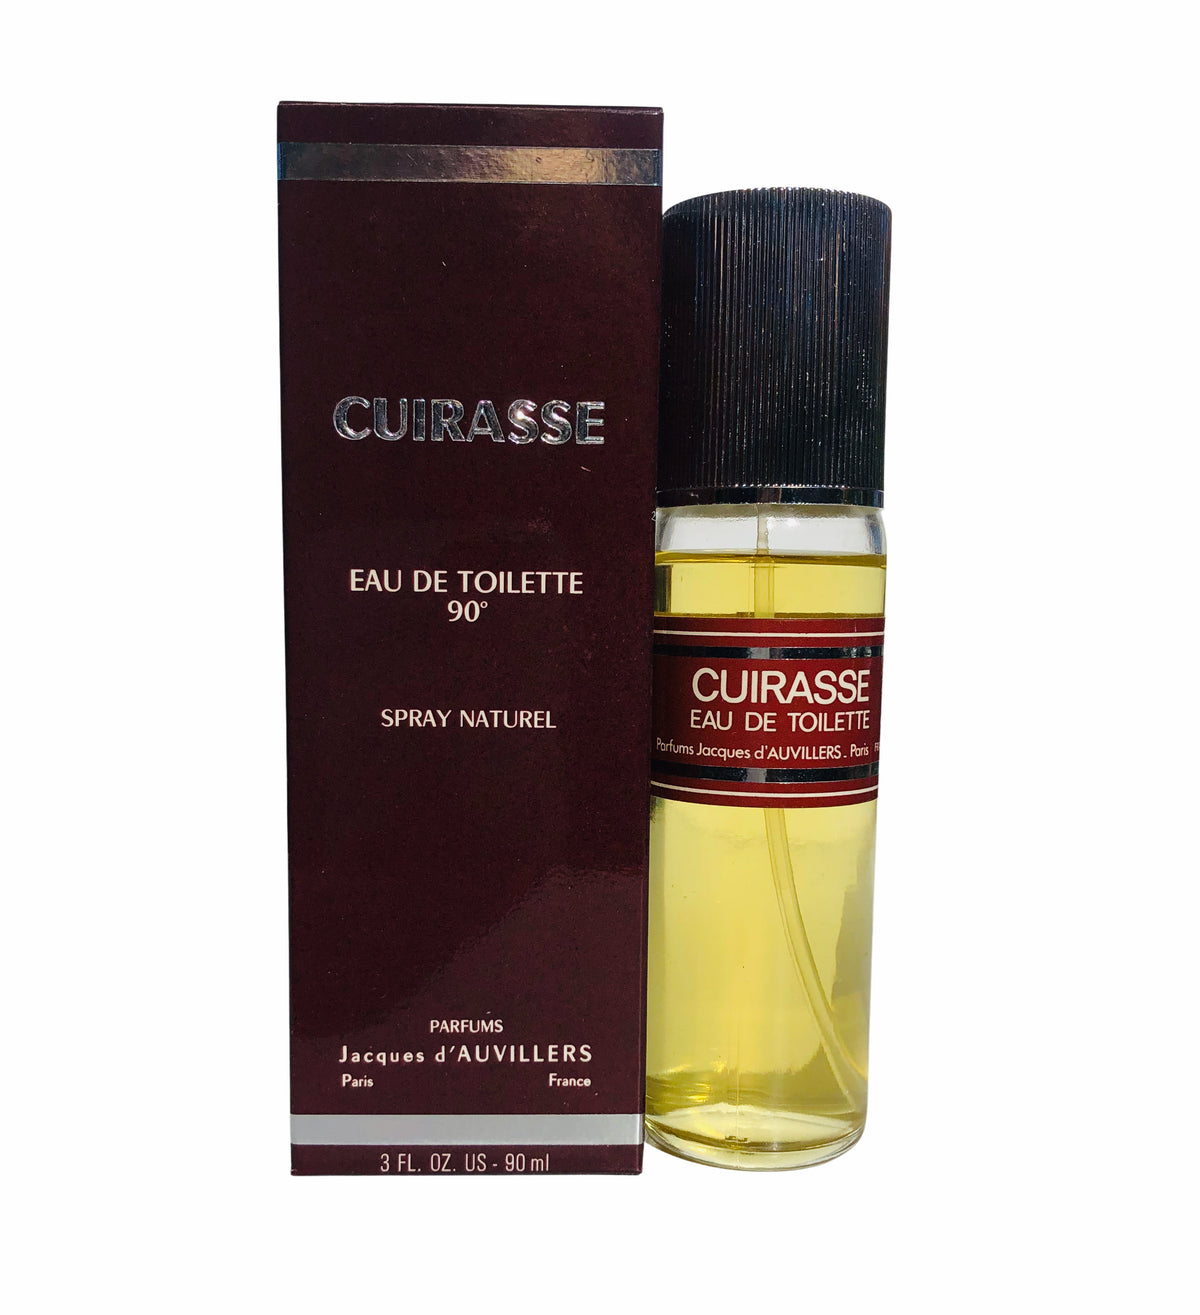 A bottle of Laboissiere Parfums Paris Jacques d' Auvillers Cuirasse Eau de Toilette - 90ml next to its dark burgundy packaging box, labeled clearly with the brand and men's fragrance details. The bottle